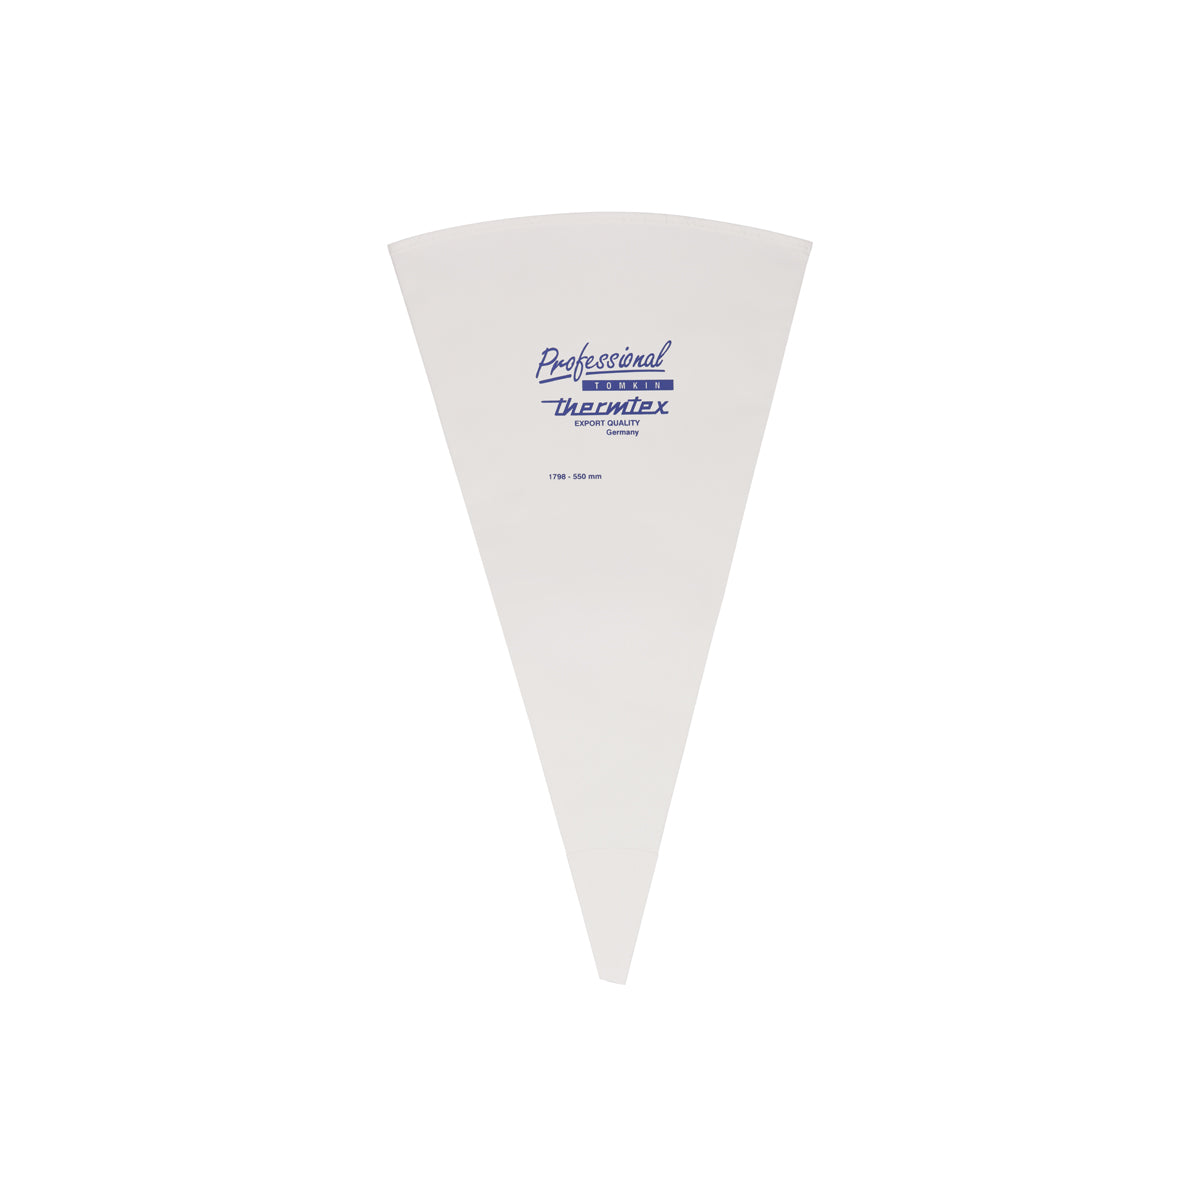 01798 Thermohauser Export Pastry Bag 550mm Tomkin Australia Hospitality Supplies